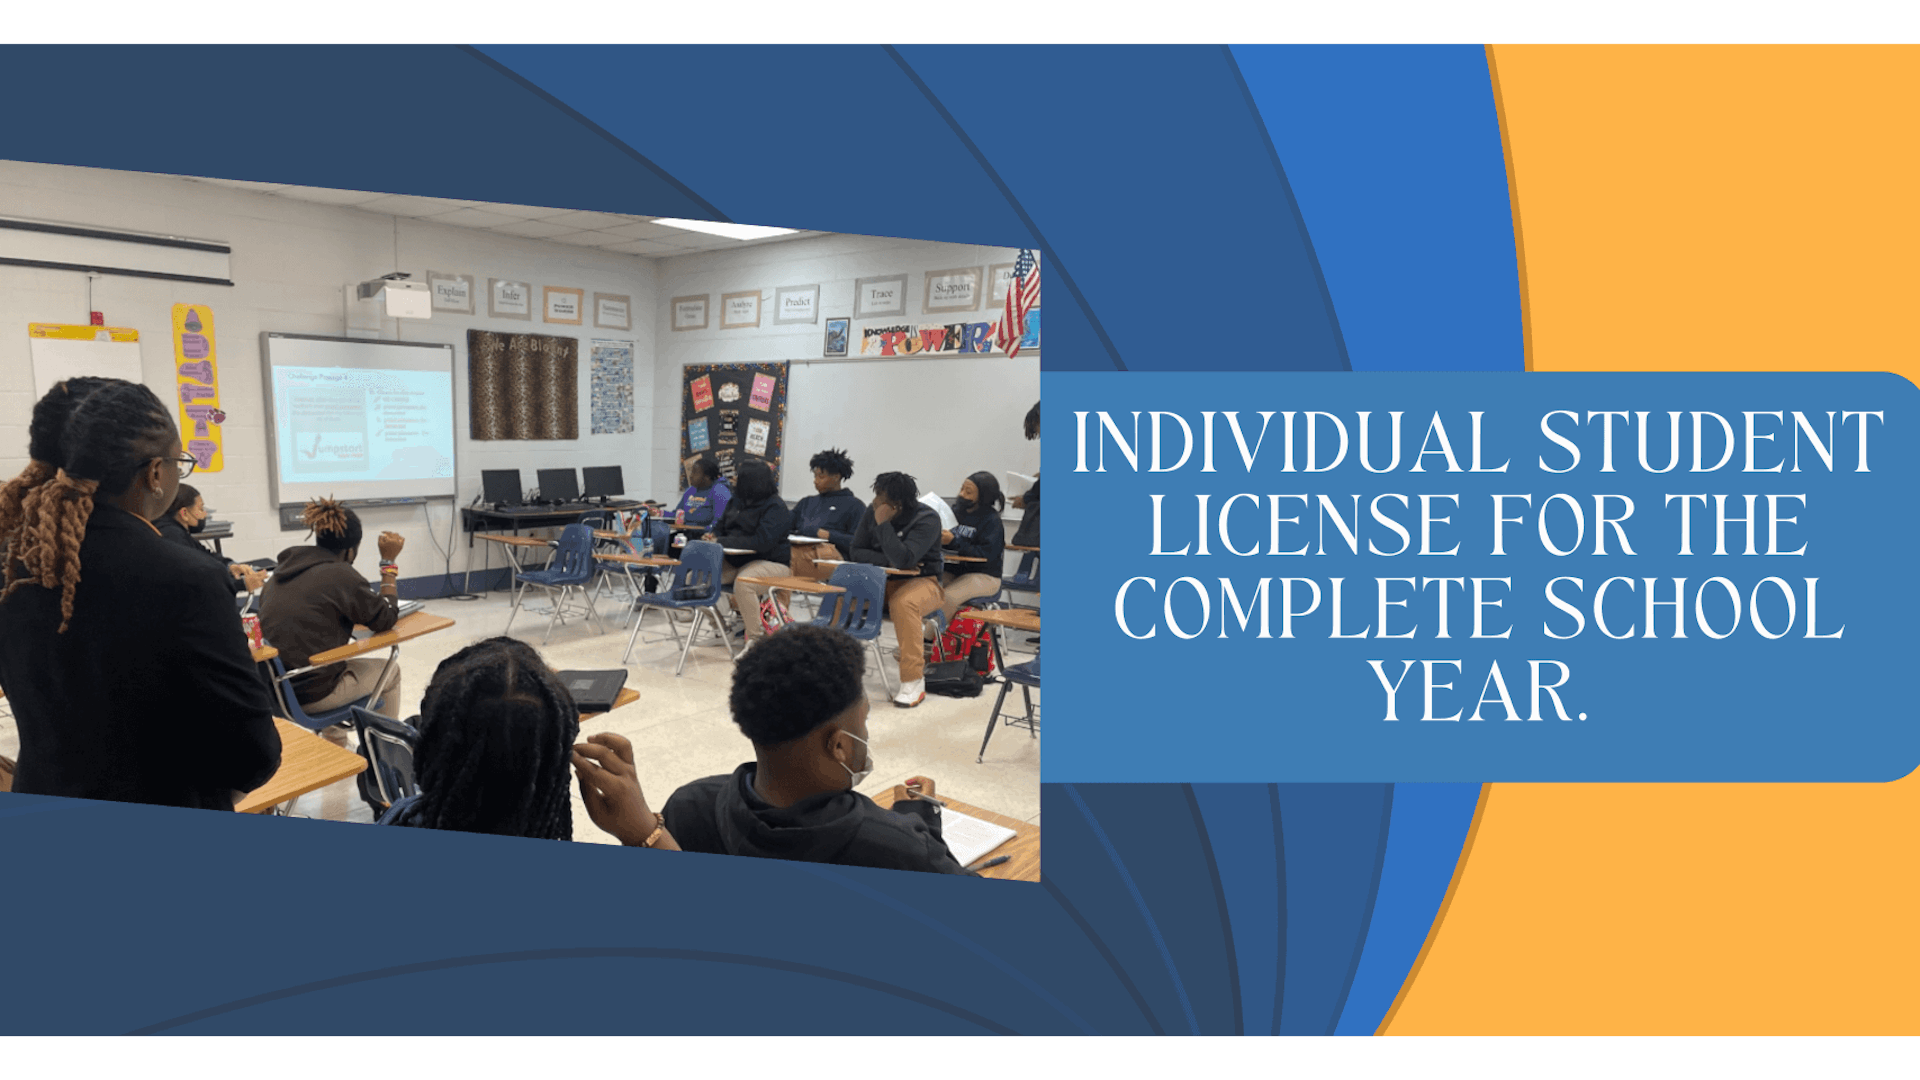 Individual student license for the complete school year